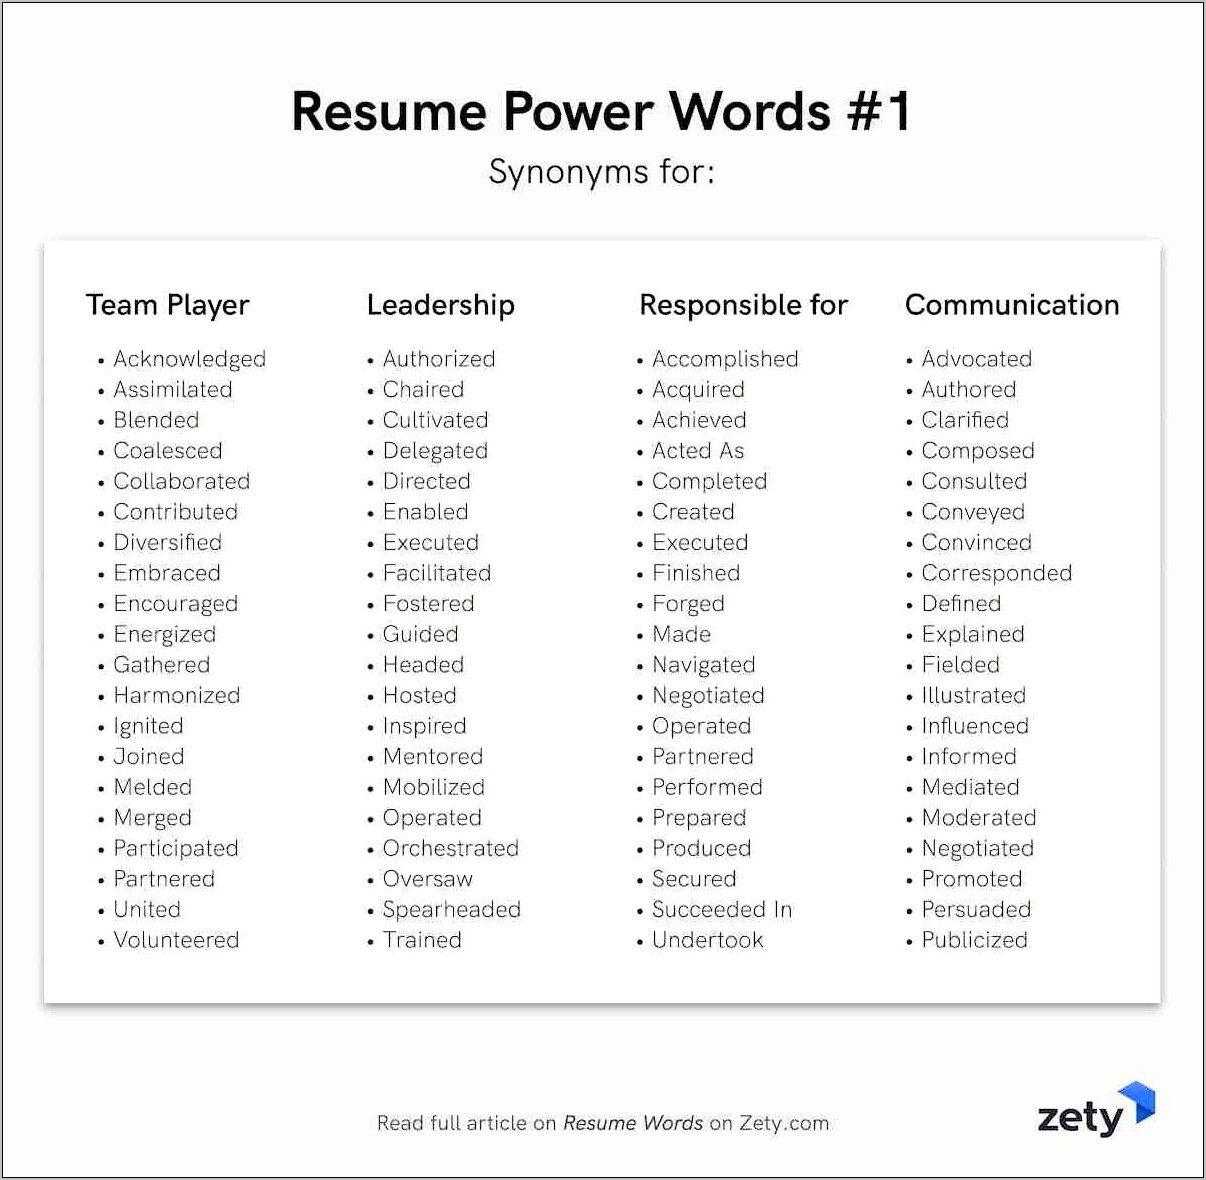 Proffesional Words To Use On A Resume